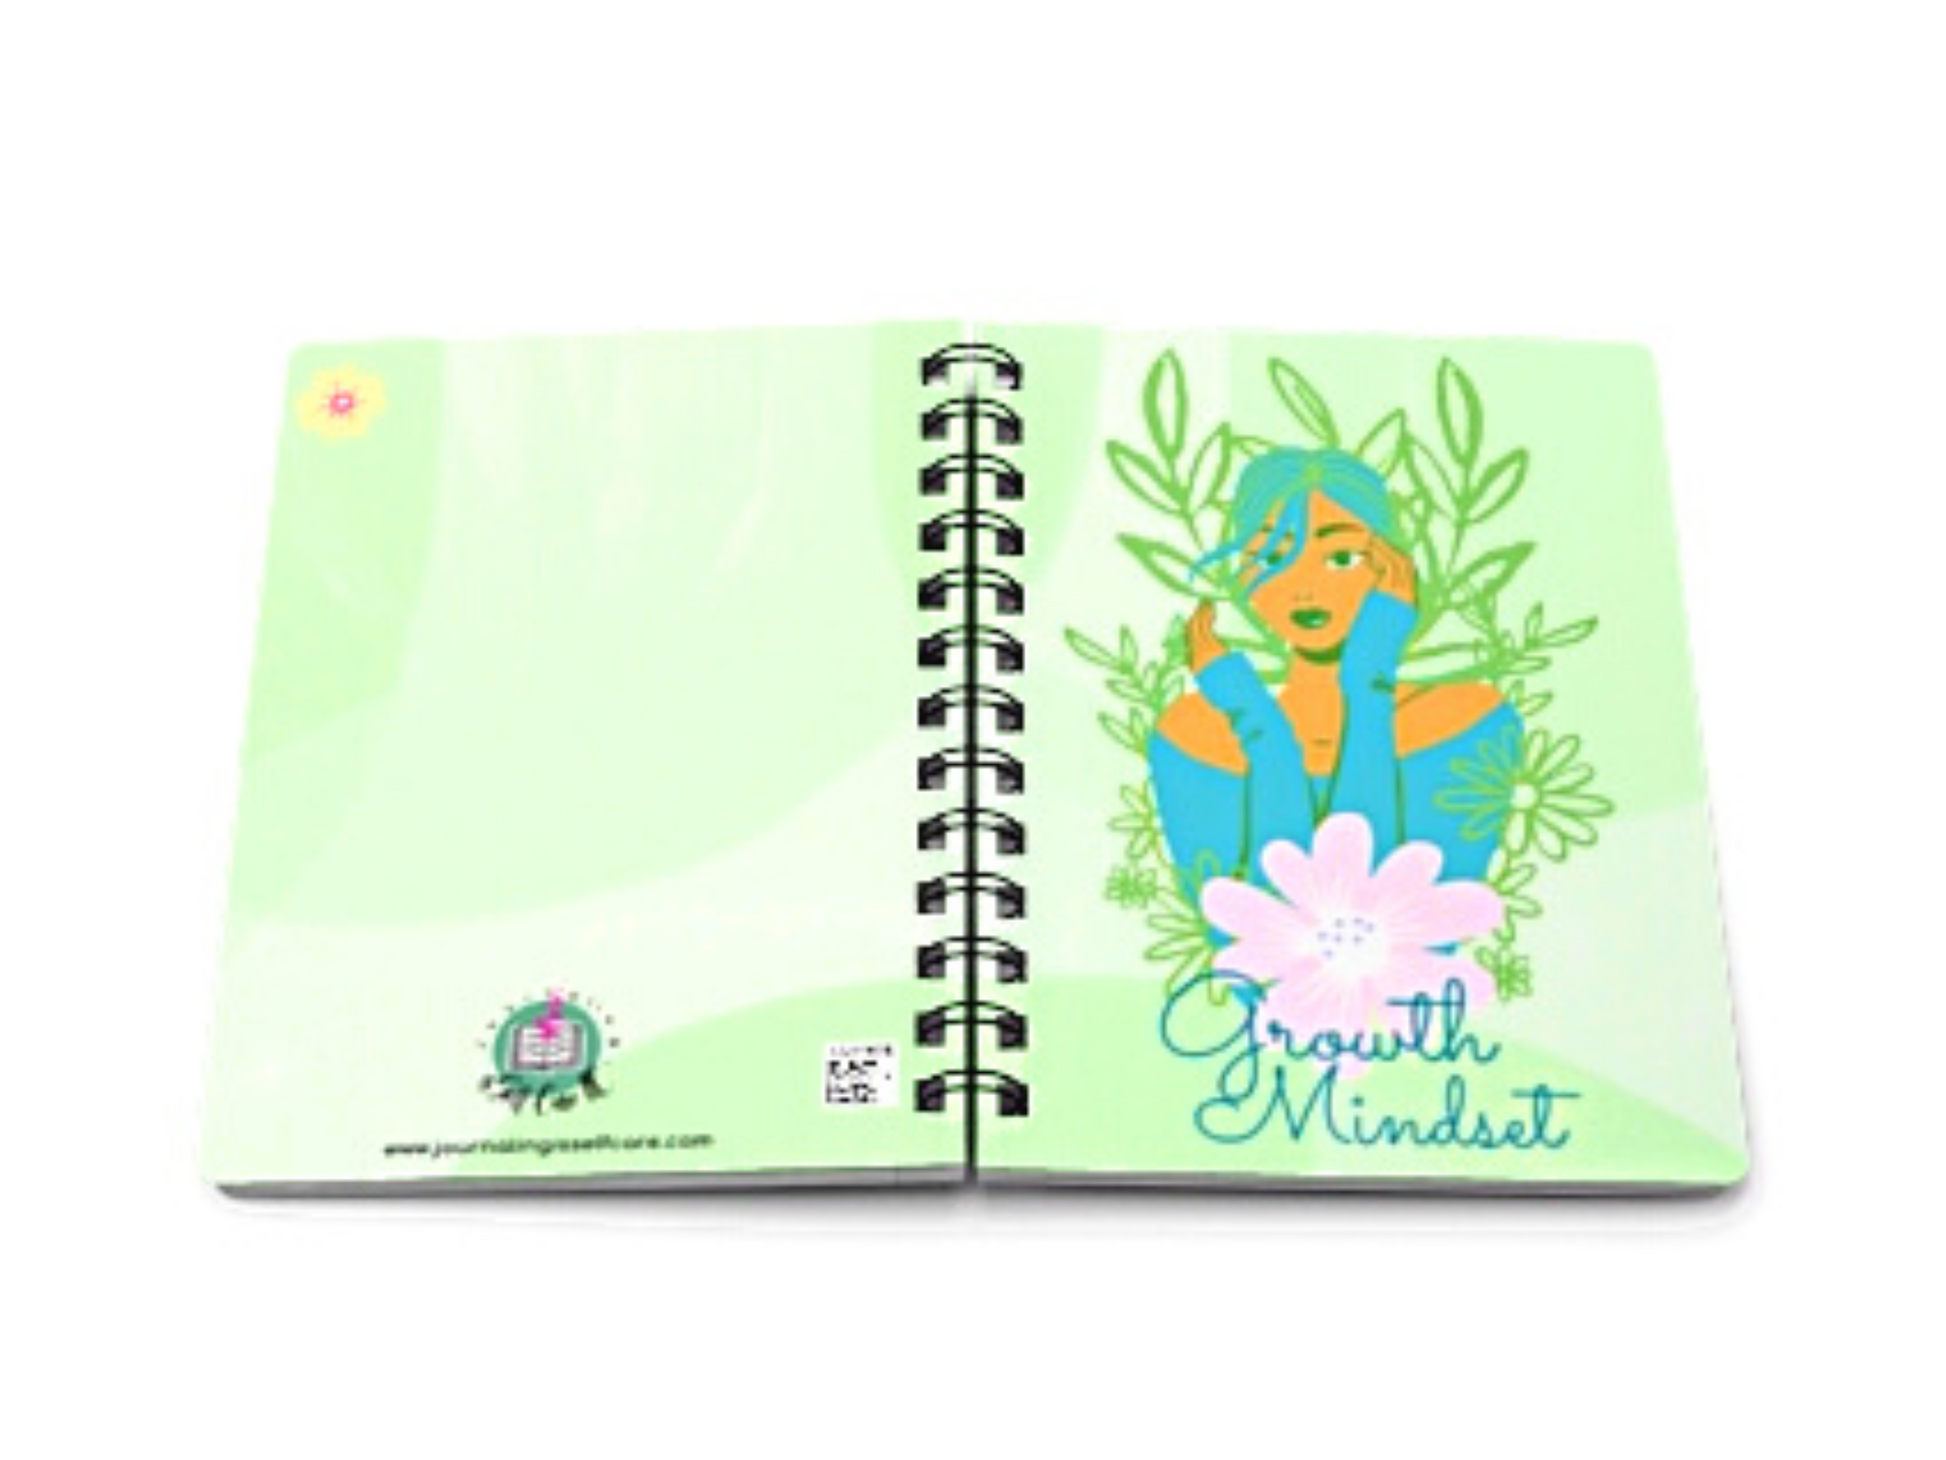 A "Growth Mindset" Inspirational Journal for Success and Self Improvement with an illustration of a woman in a green flower on the cover.